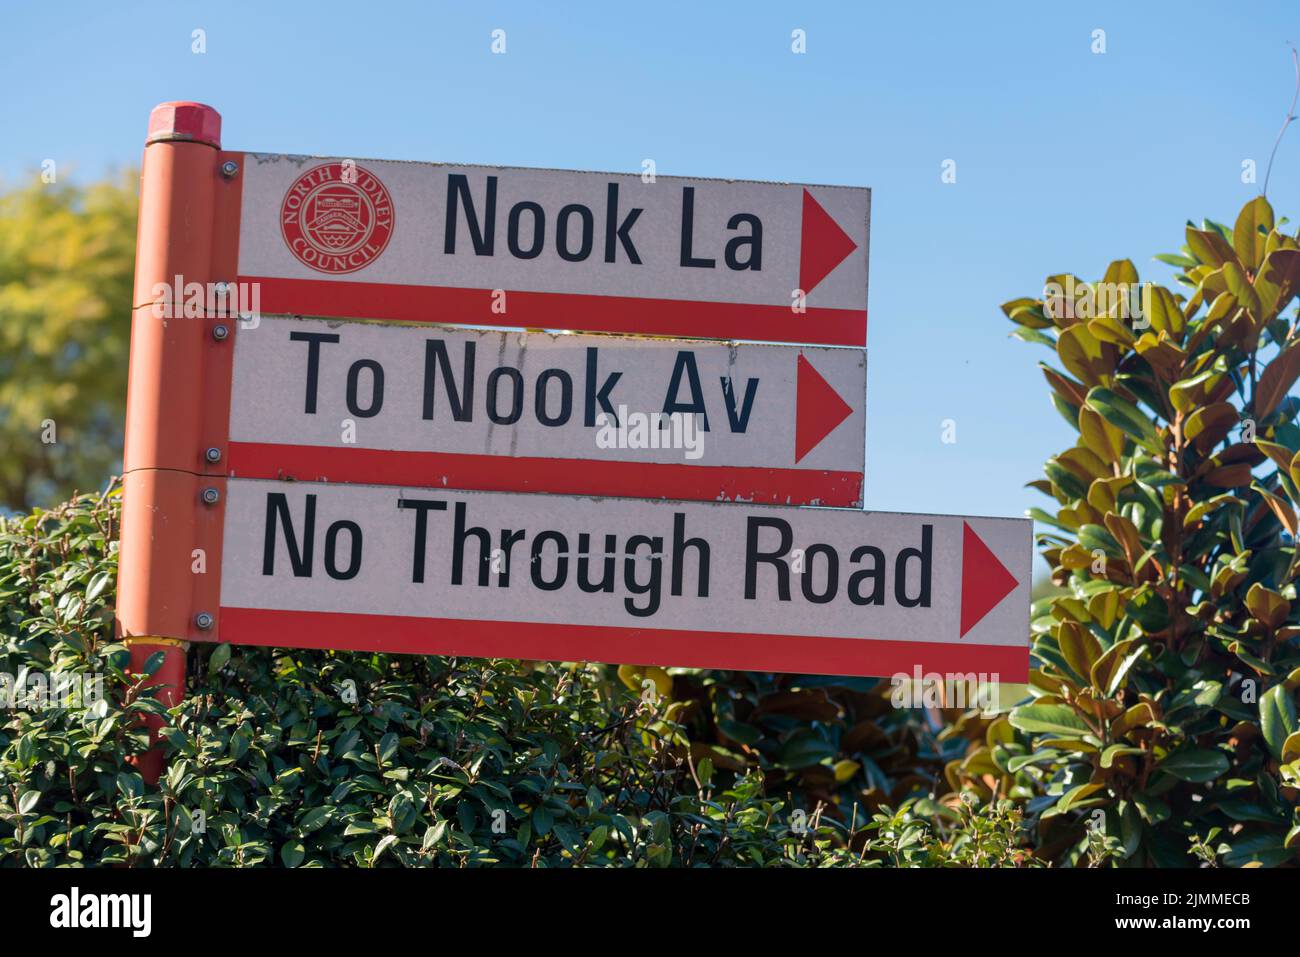 A quirky set of street signs named Nook Lane, leading to Nook Avenue in Neutral Bay, Sydney, Australia Stock Photo